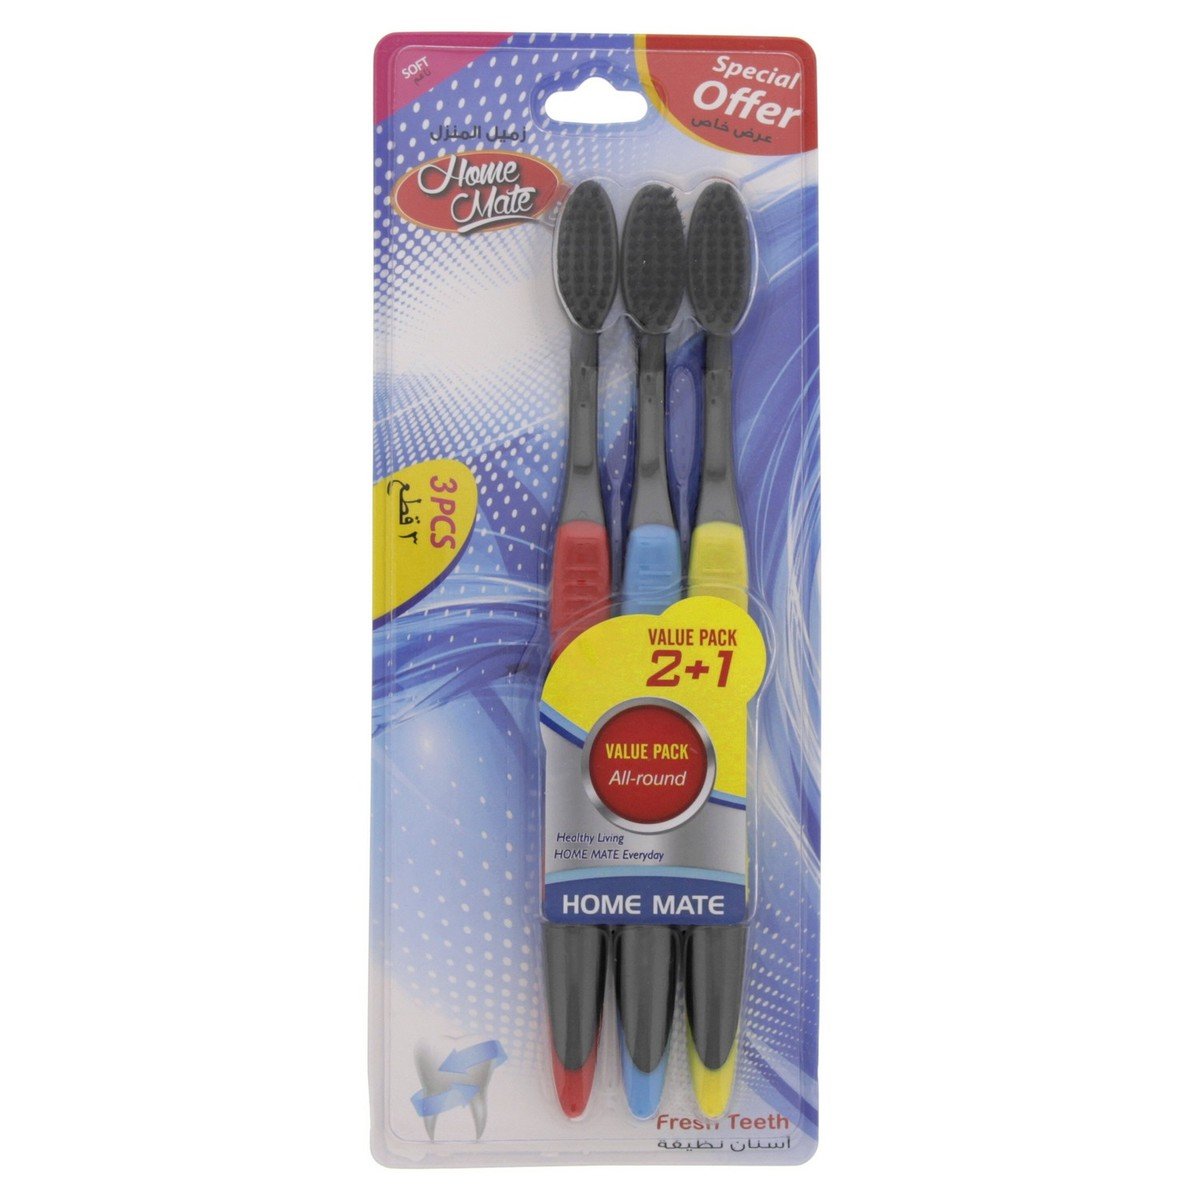 Home Mate Soft Toothbrush 101-3 2+1